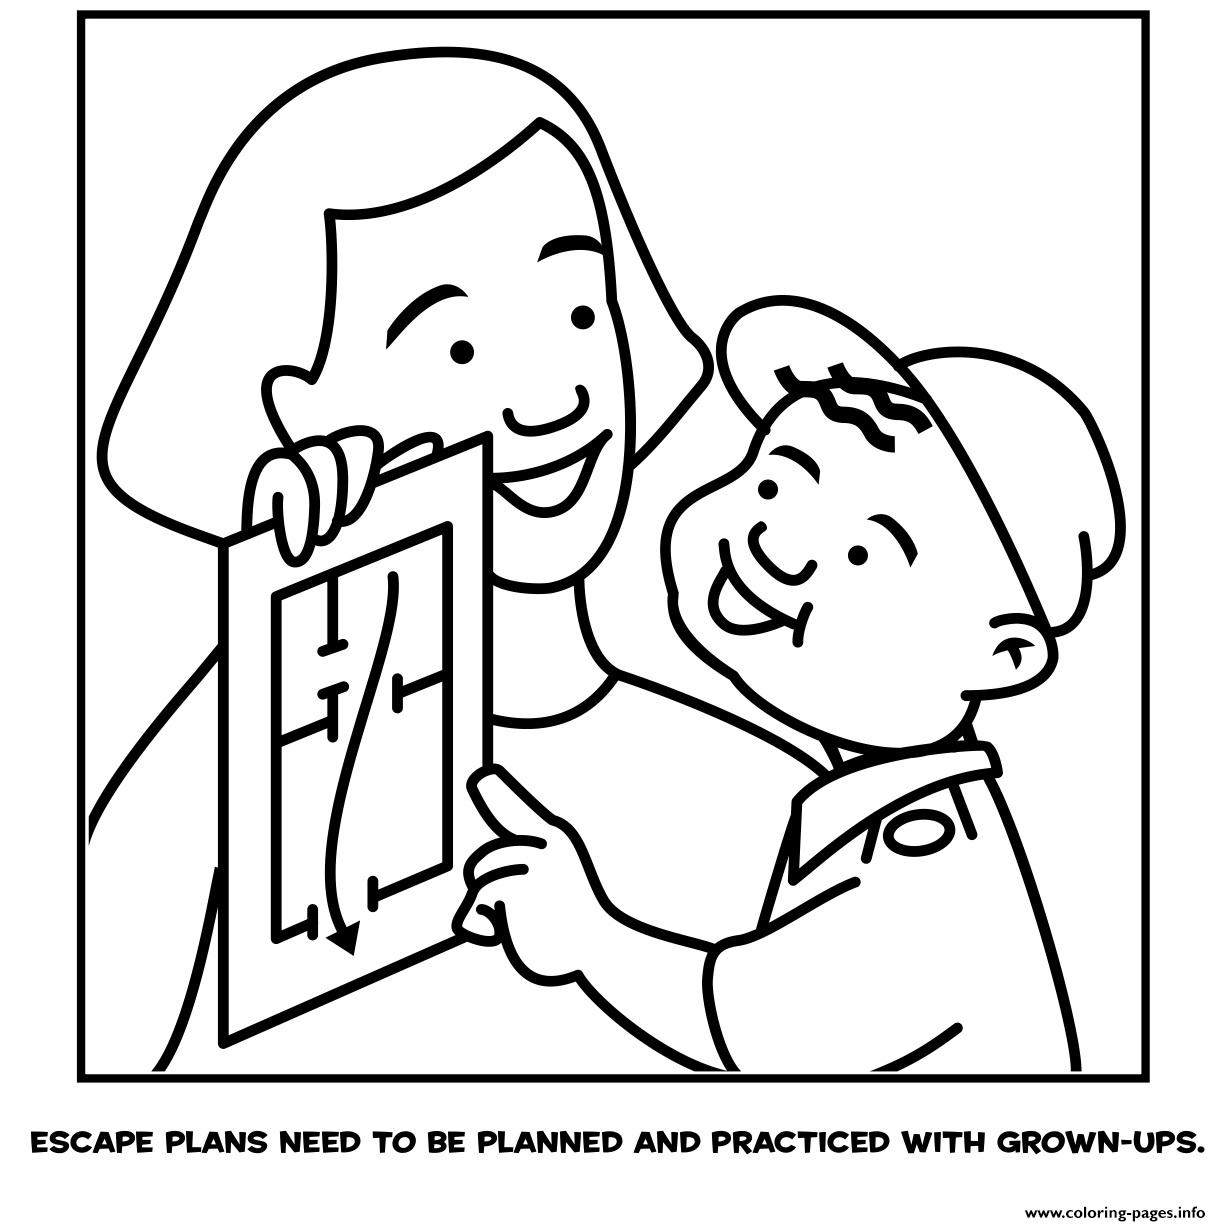 Escape Plans Need To Be Planned And Practiceed With Grown Ups coloring